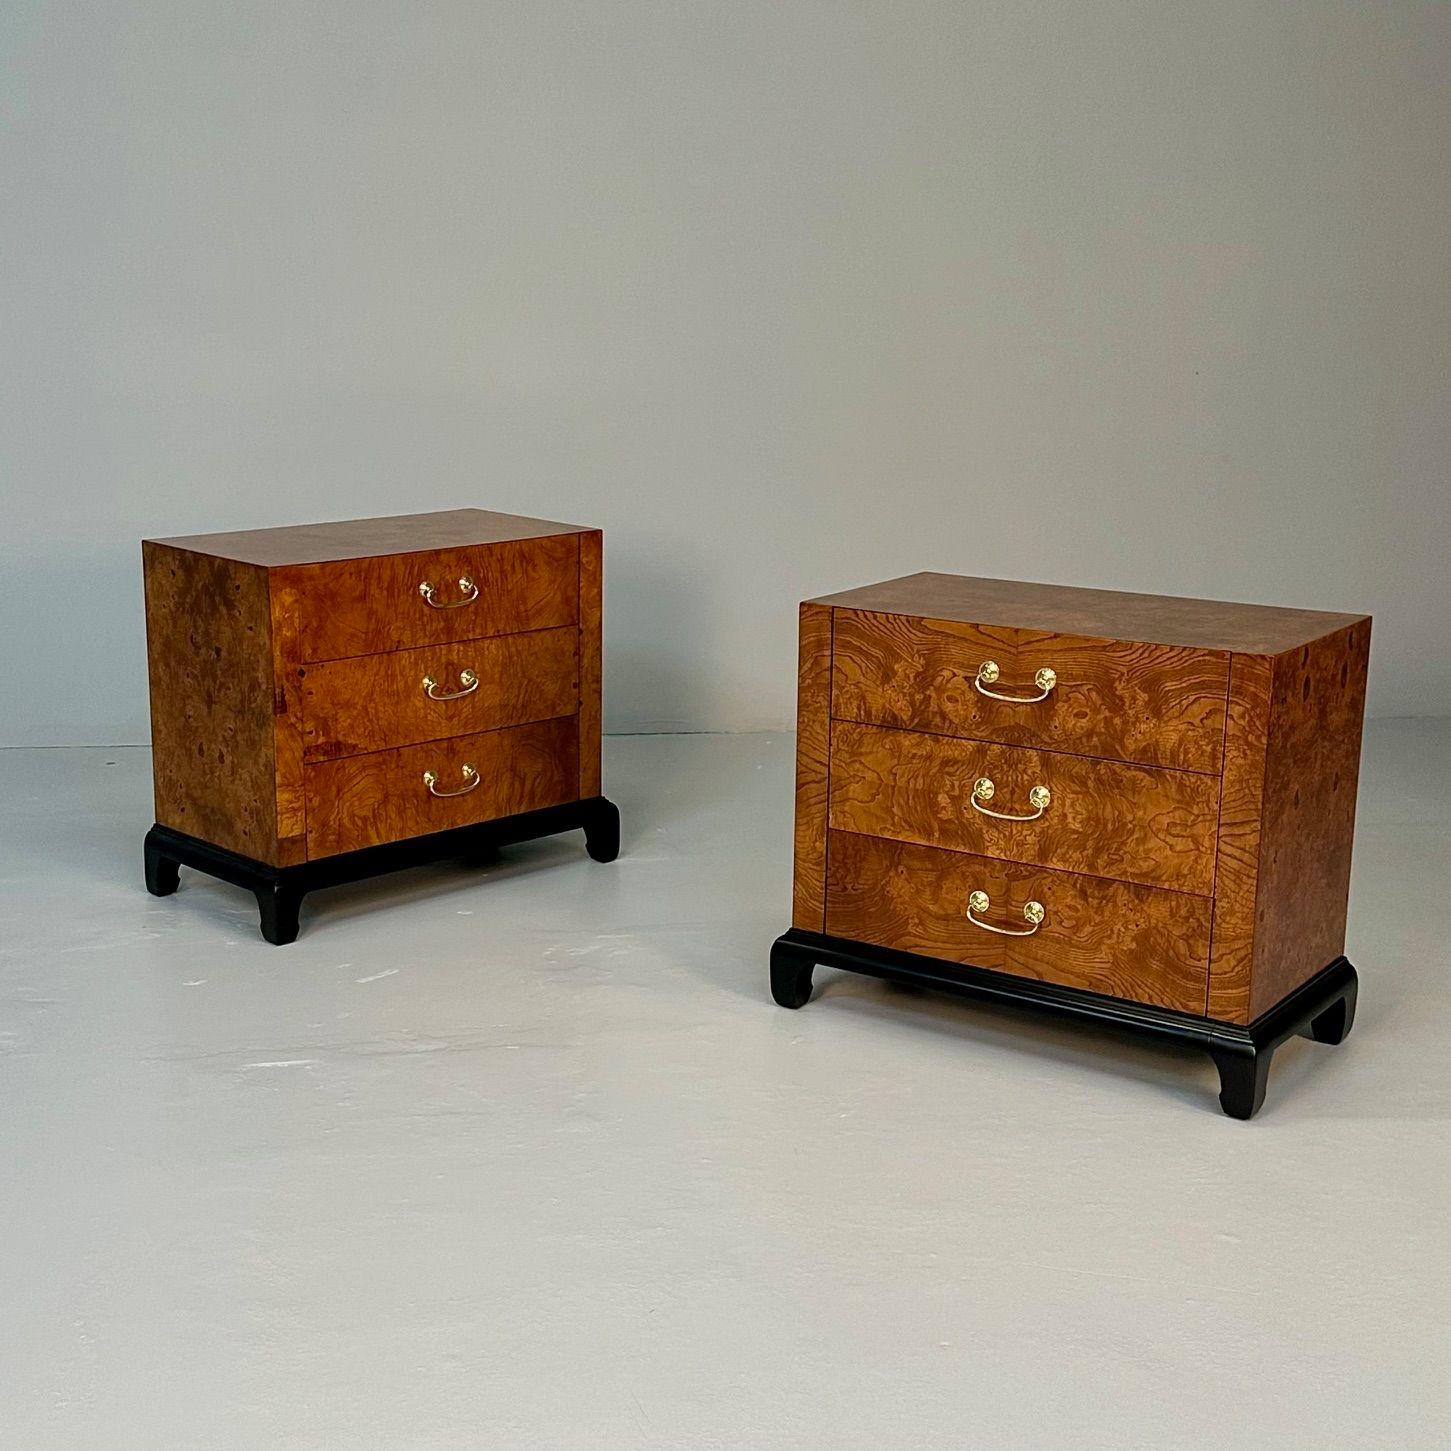 Pair of Mid-Century Modern Burlwood Nightstands / Chests or End Tables, Branded Hekman, Mastercraft Style

Each having a tortoise shell veneer exterior, three drawers with bronze handles on ebonized bracket bases. The pair finely refinished.

Three